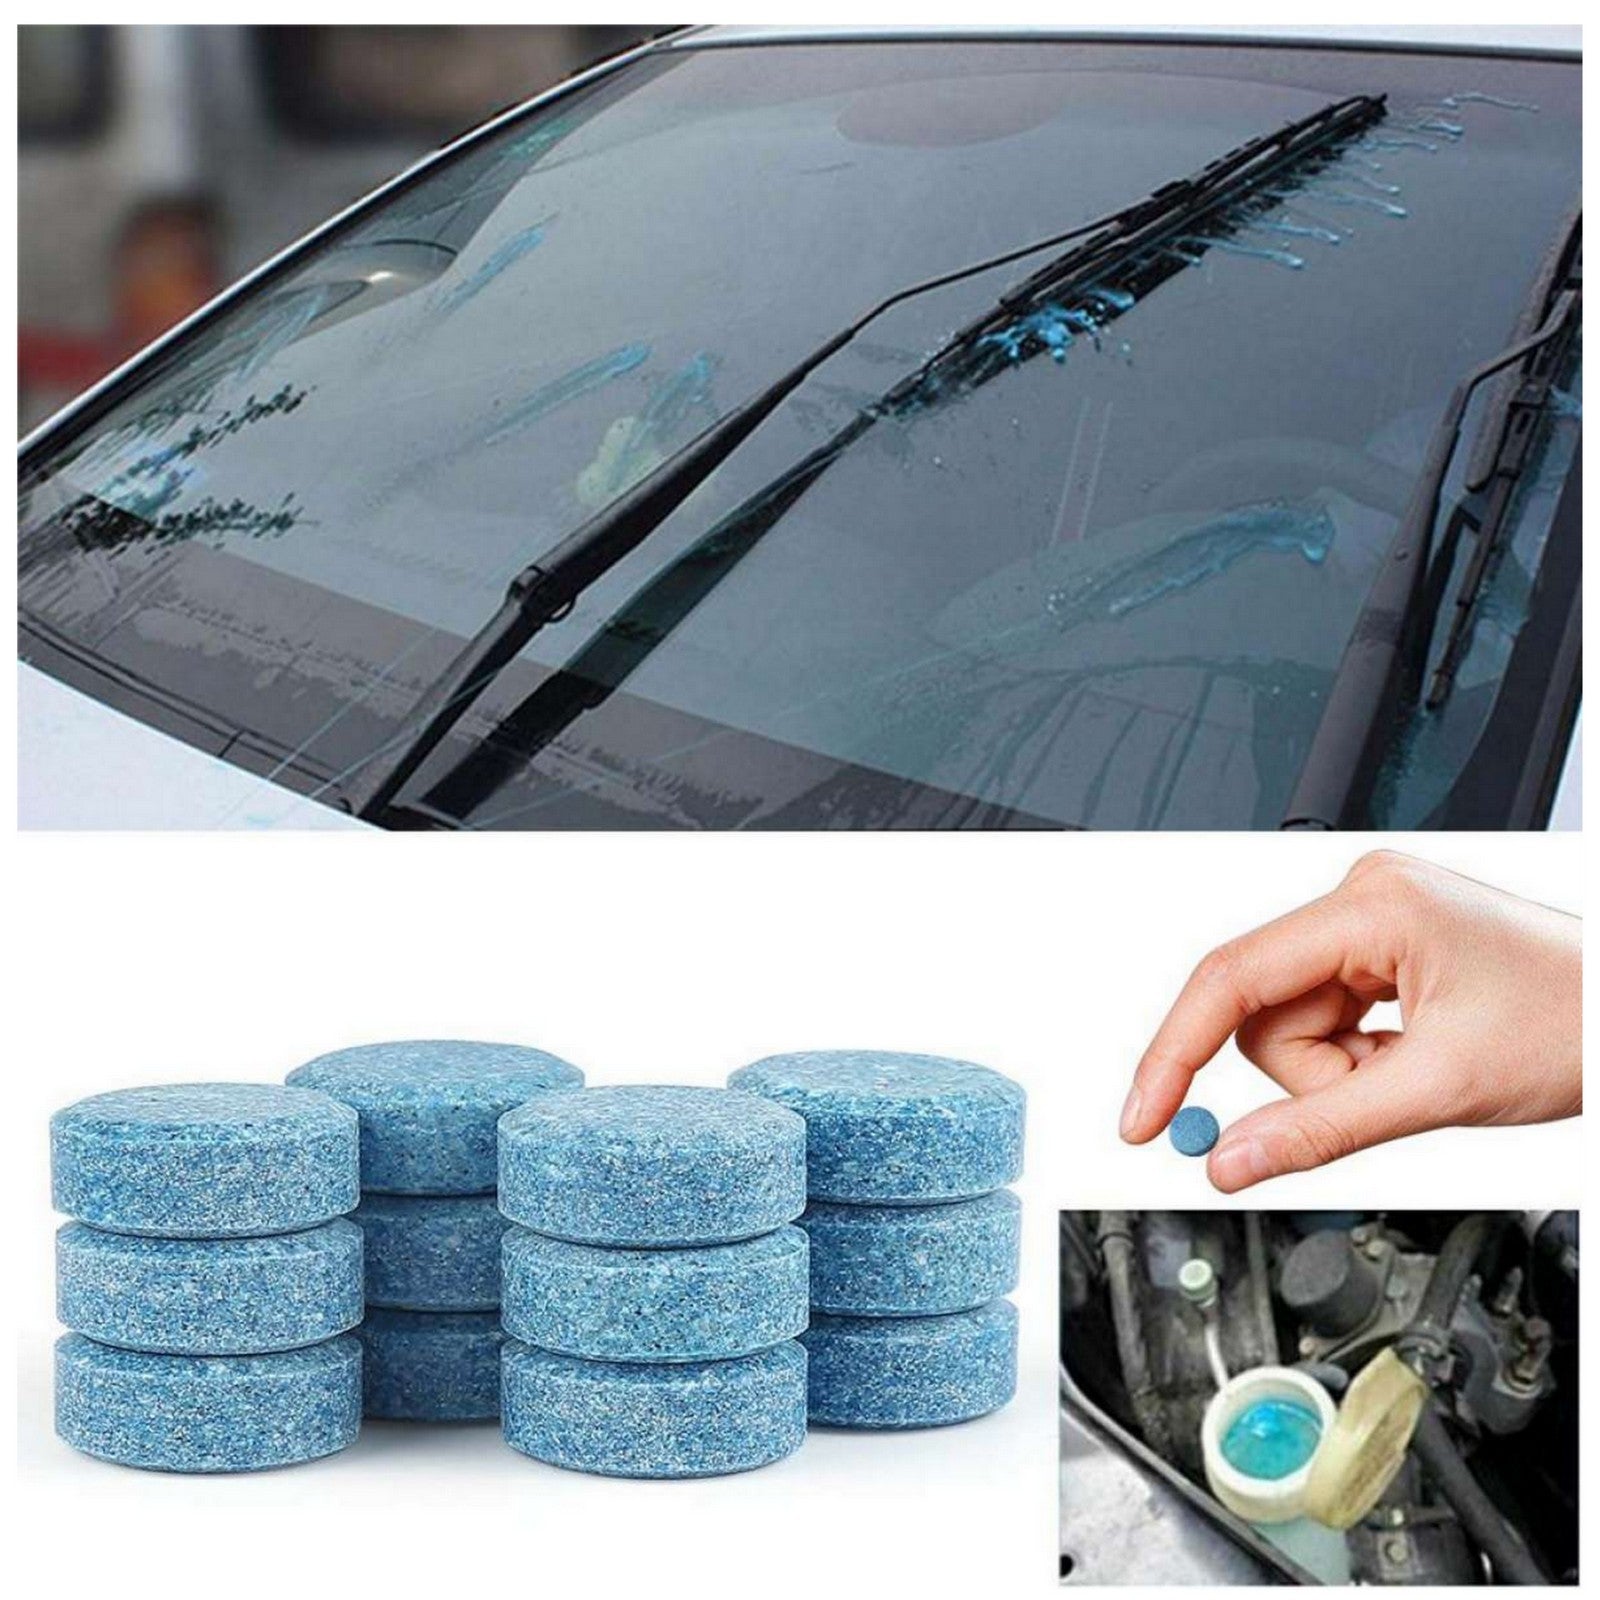 Car Accessories Glass Cleaner Tablets Windshield Wiper washer Home window  glass cleaner car glass washing shampoo